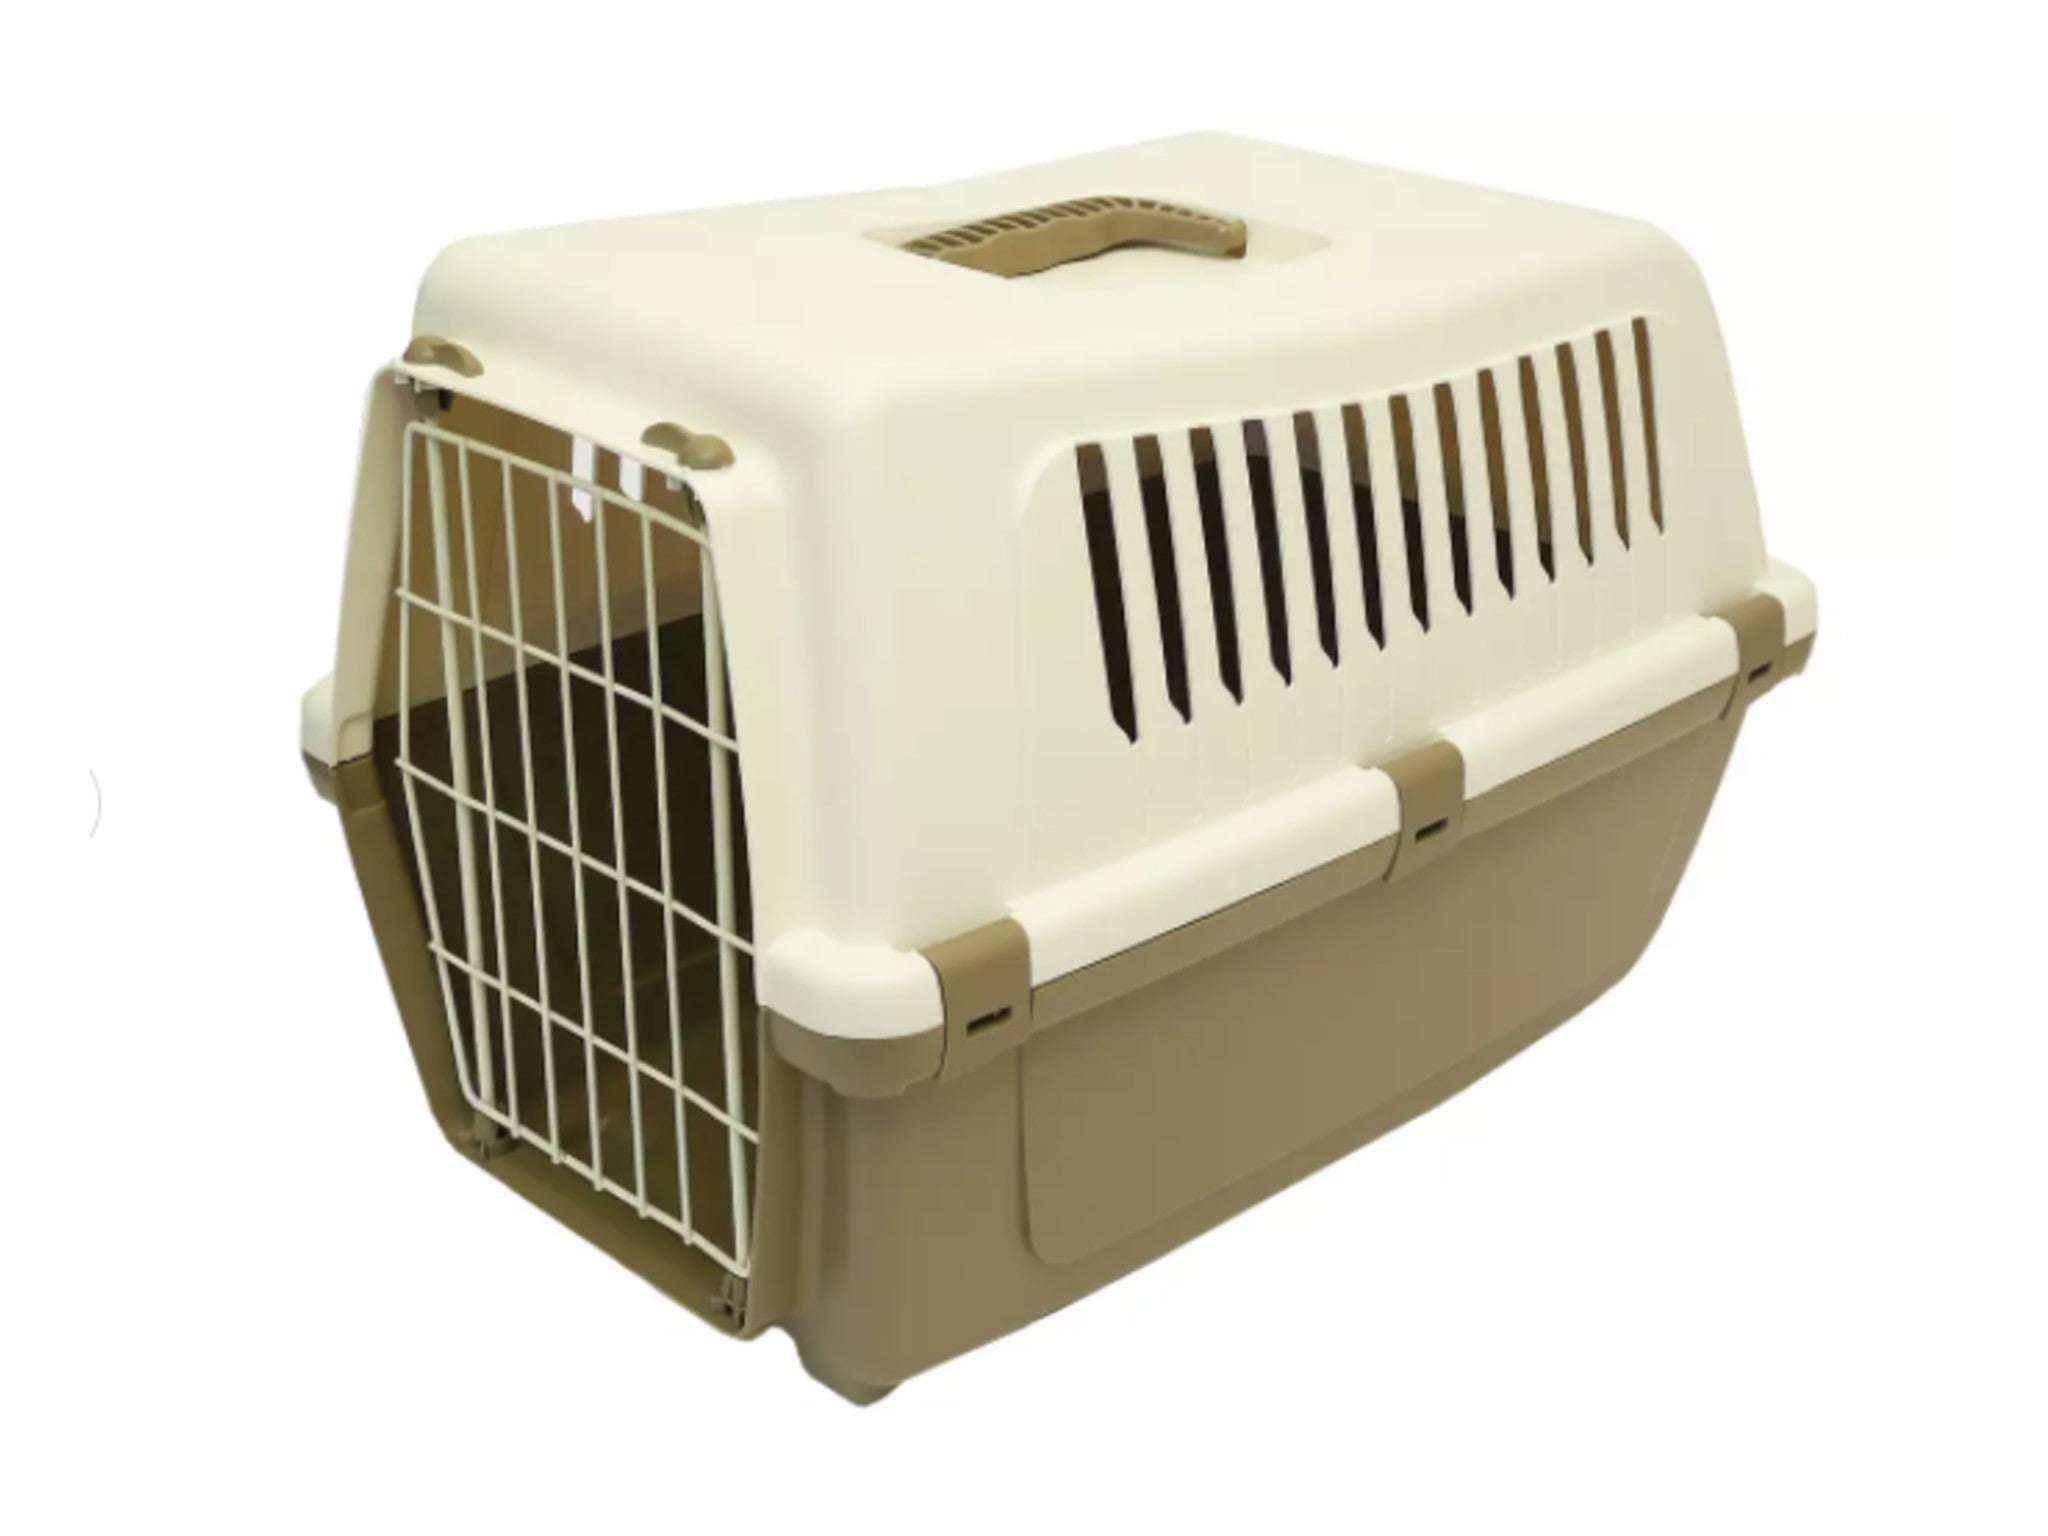 Rosewood plastic pet carrier with cushion – Medium indybest